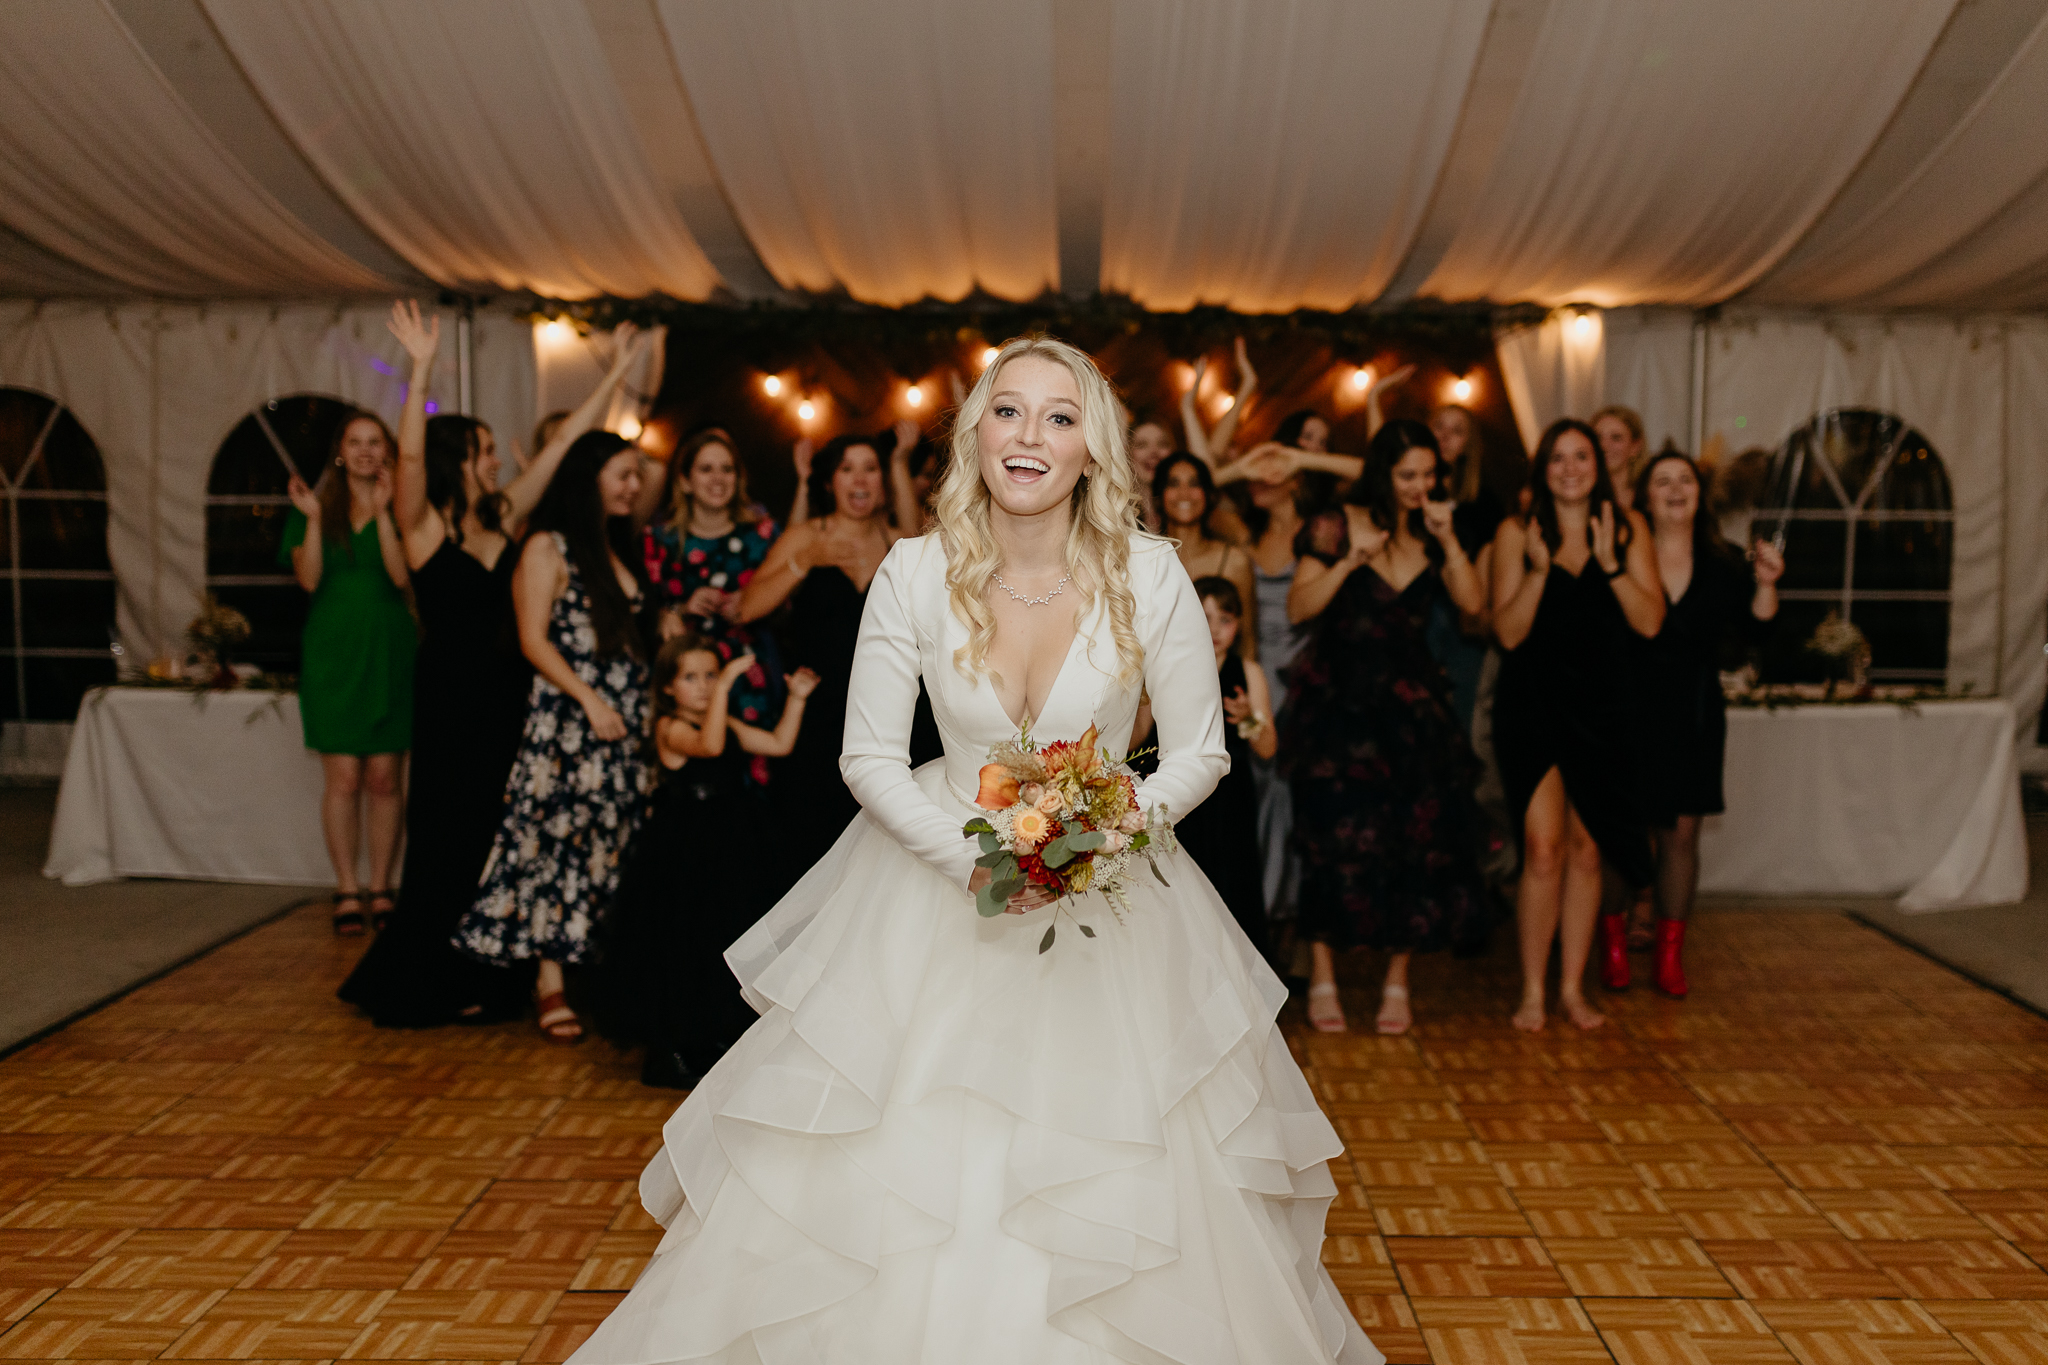 Bride tosses bouquet to all the single women on the dance floor